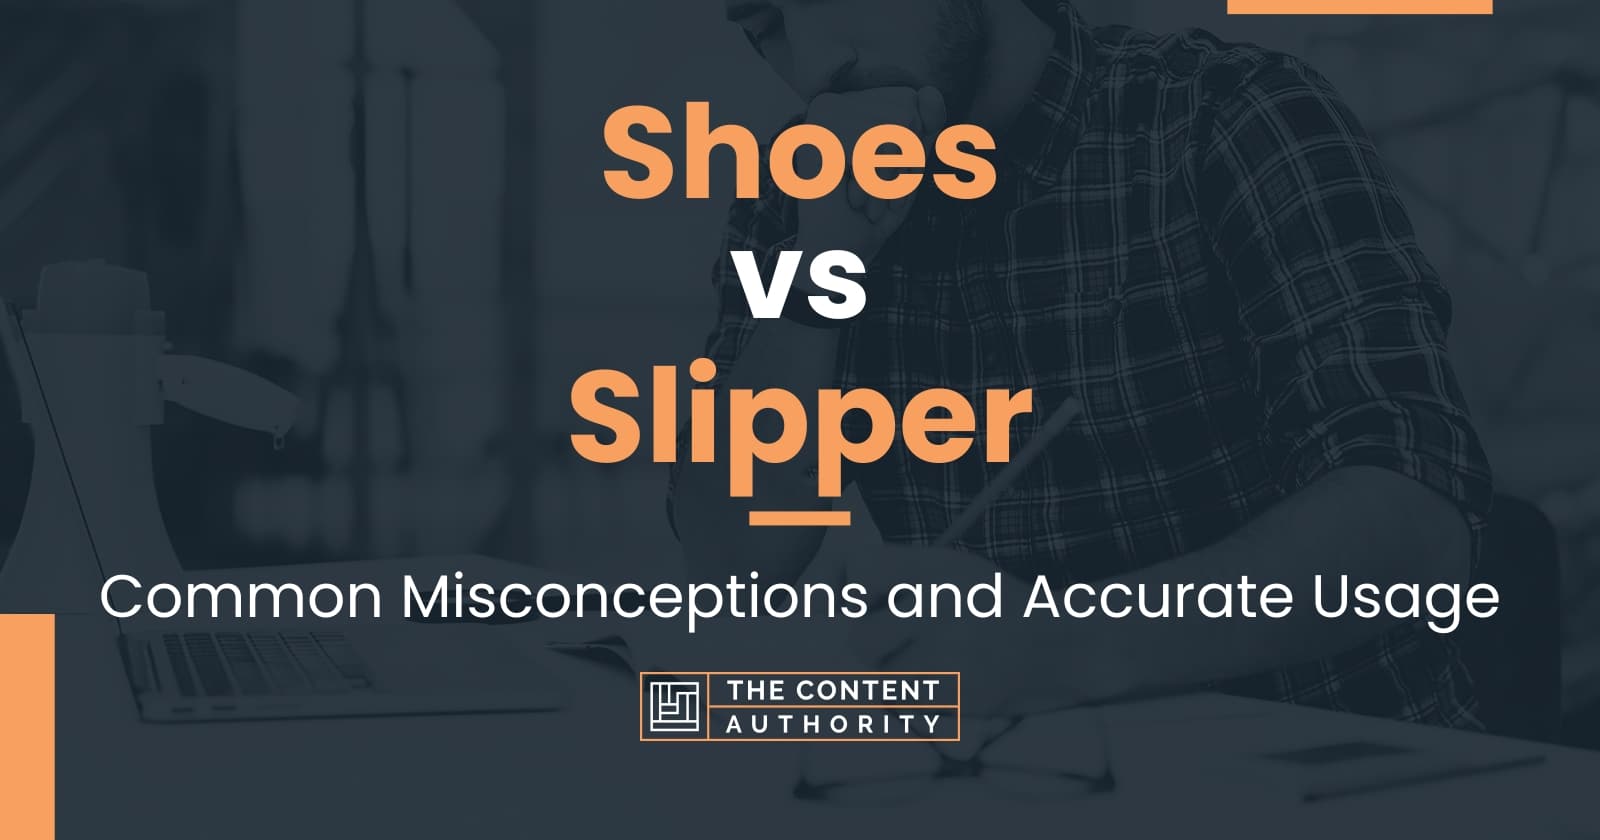 Shoes vs Slipper: Common Misconceptions and Accurate Usage